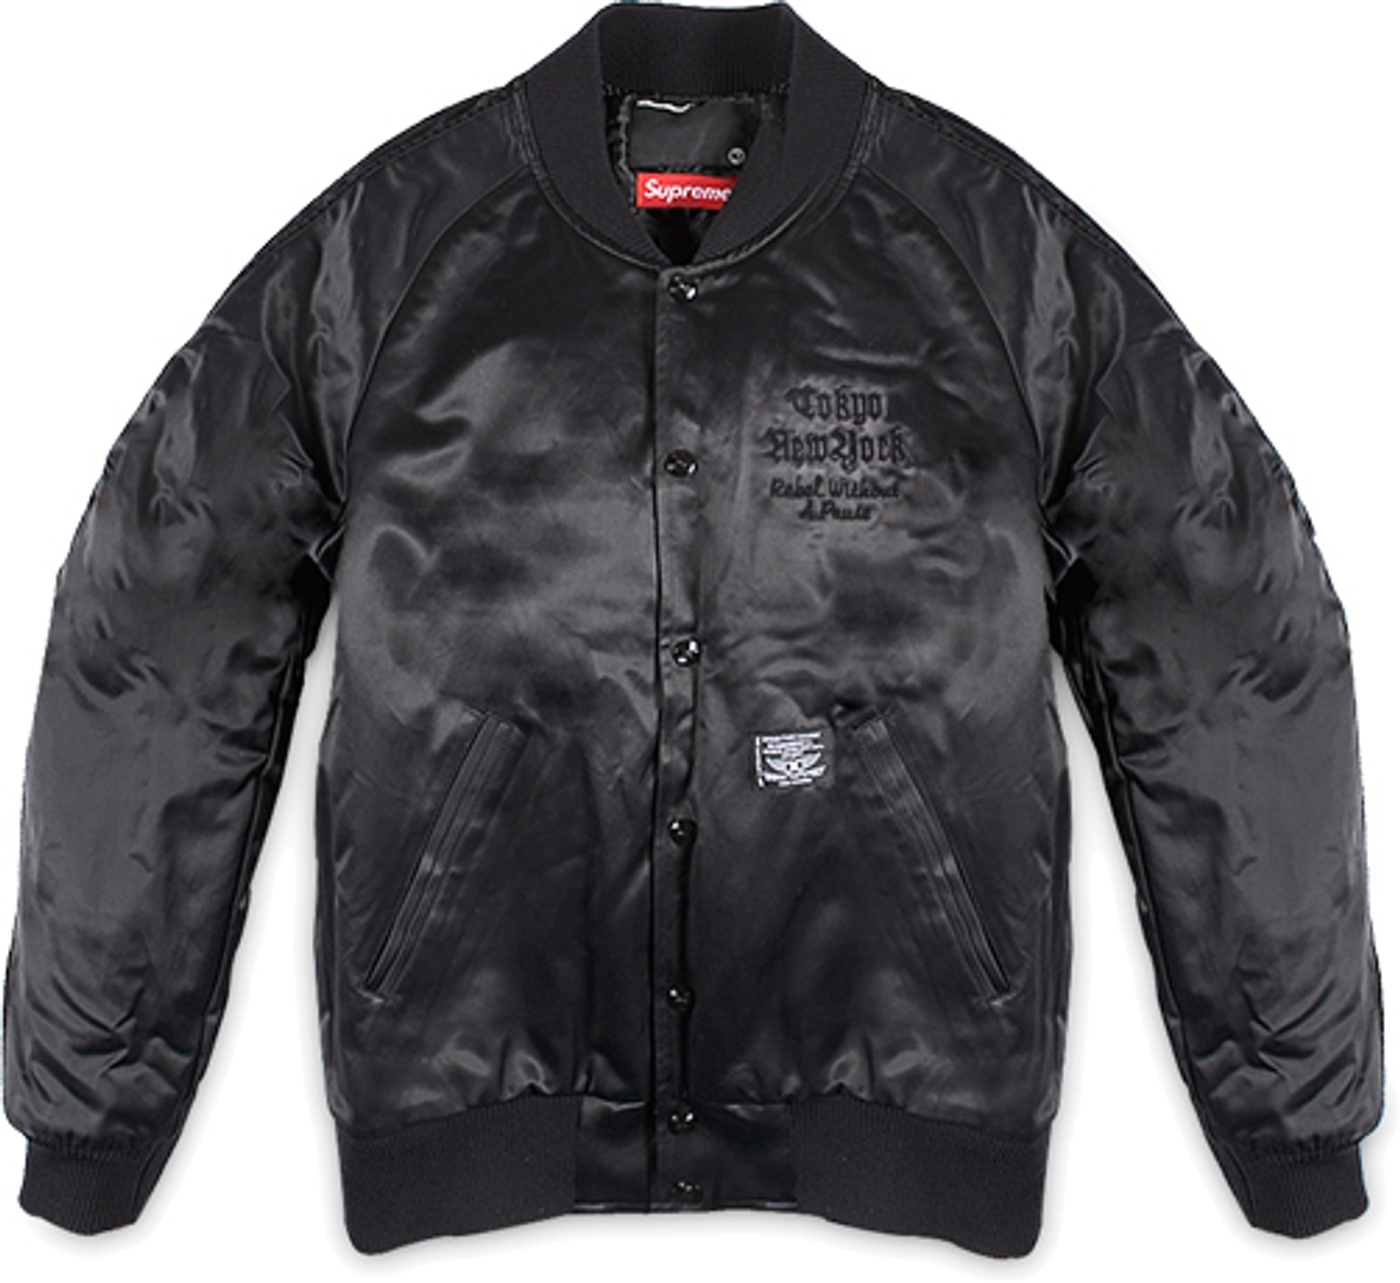 Baseball Jacket All satin. 
Exclusively for Supreme. (2/8)